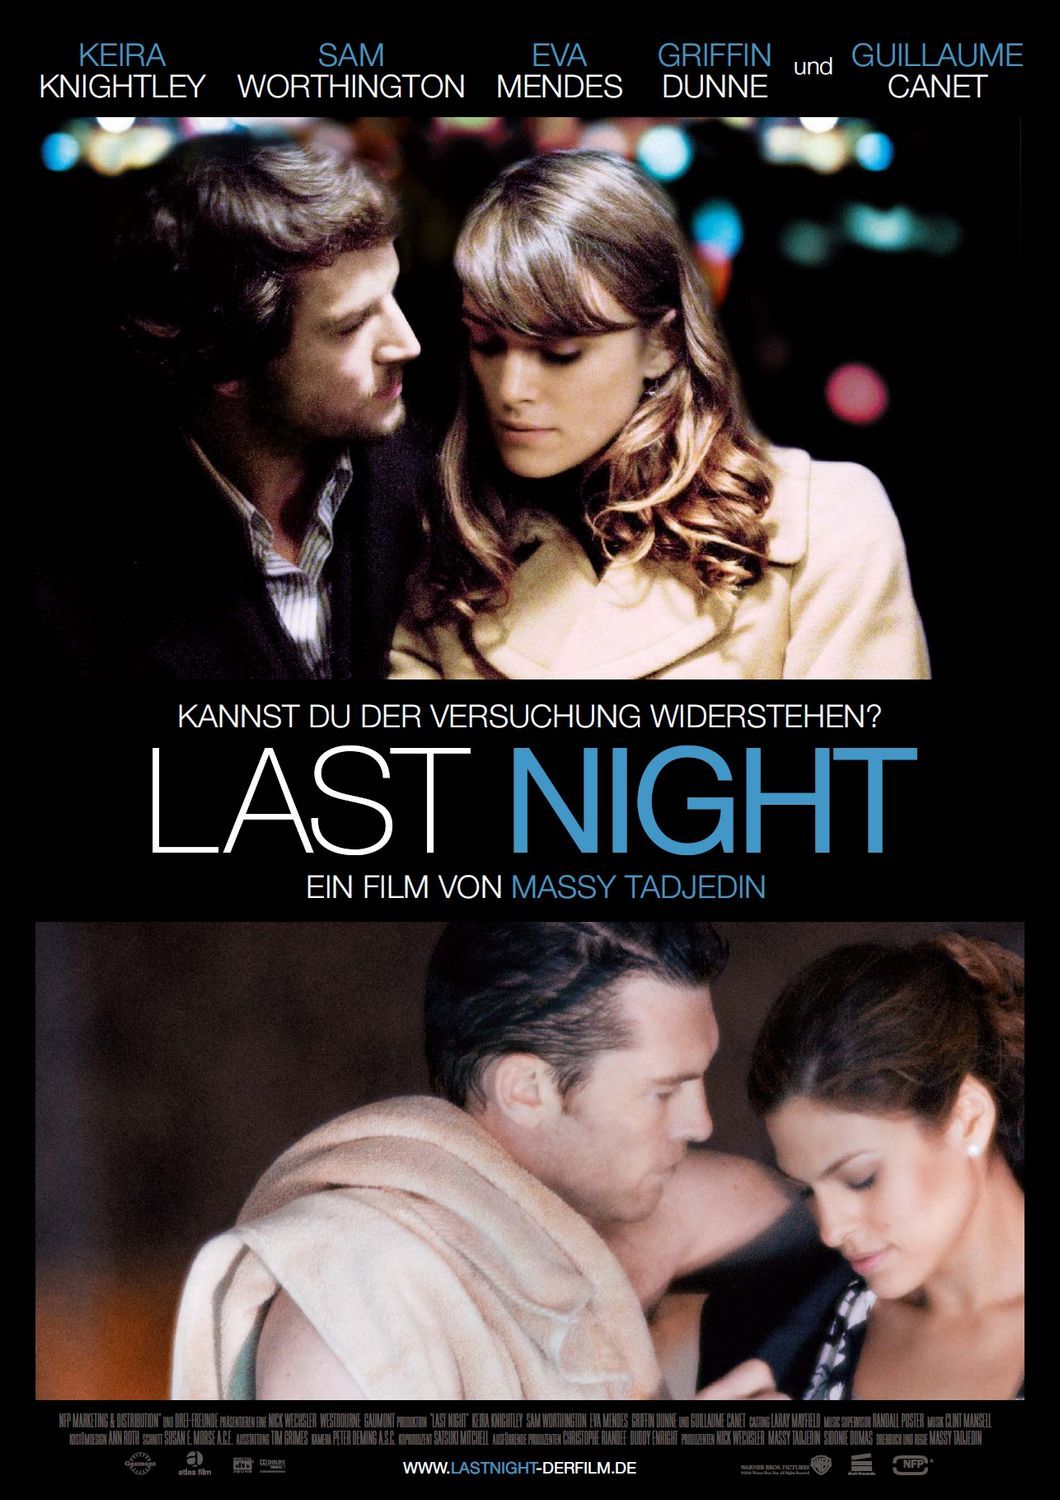 Last Night acquired by Miramax Films for a Spring 2011 theatrical and VOD releaseTribeca Film and Miramax today announced they are teaming up on the U.S. release of {0}, an intricately layered relationship drama starring {1}, {2}, {3} and {4}. Tribeca Film has acquired theatrical, VOD and select digital rights to Last Night and plans to release the film in Spring 2011 theatrically in multiple U.S. markets, including New York and Los Angeles, and also via national VOD outlets and on additional pl